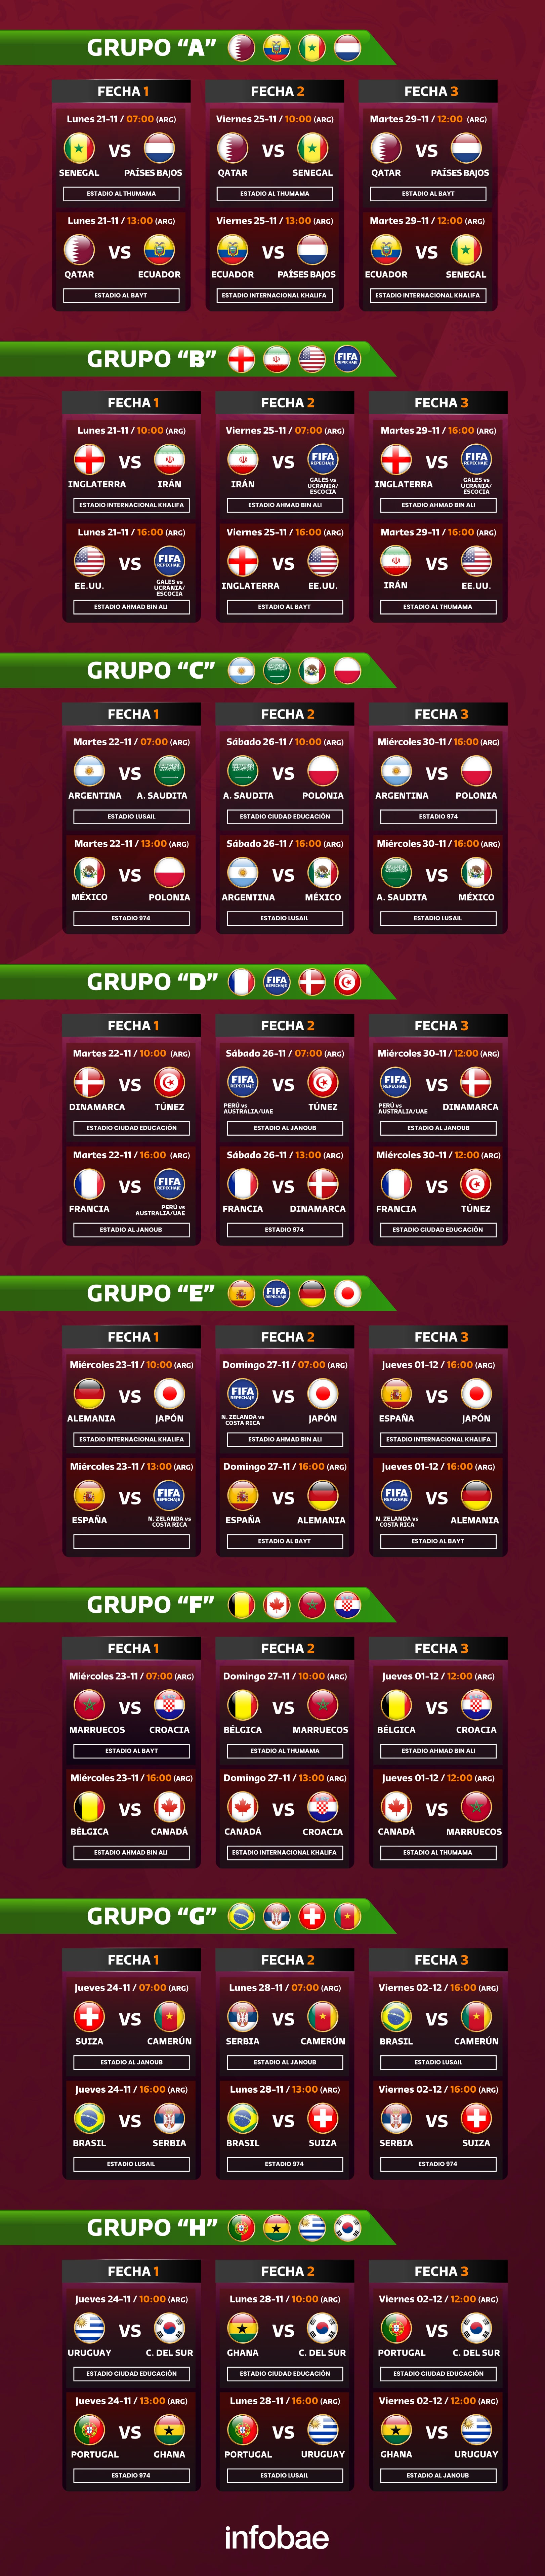 The complete fixture of the Qatar 2022 World Cup days, times and stadiums of all World Cup matches